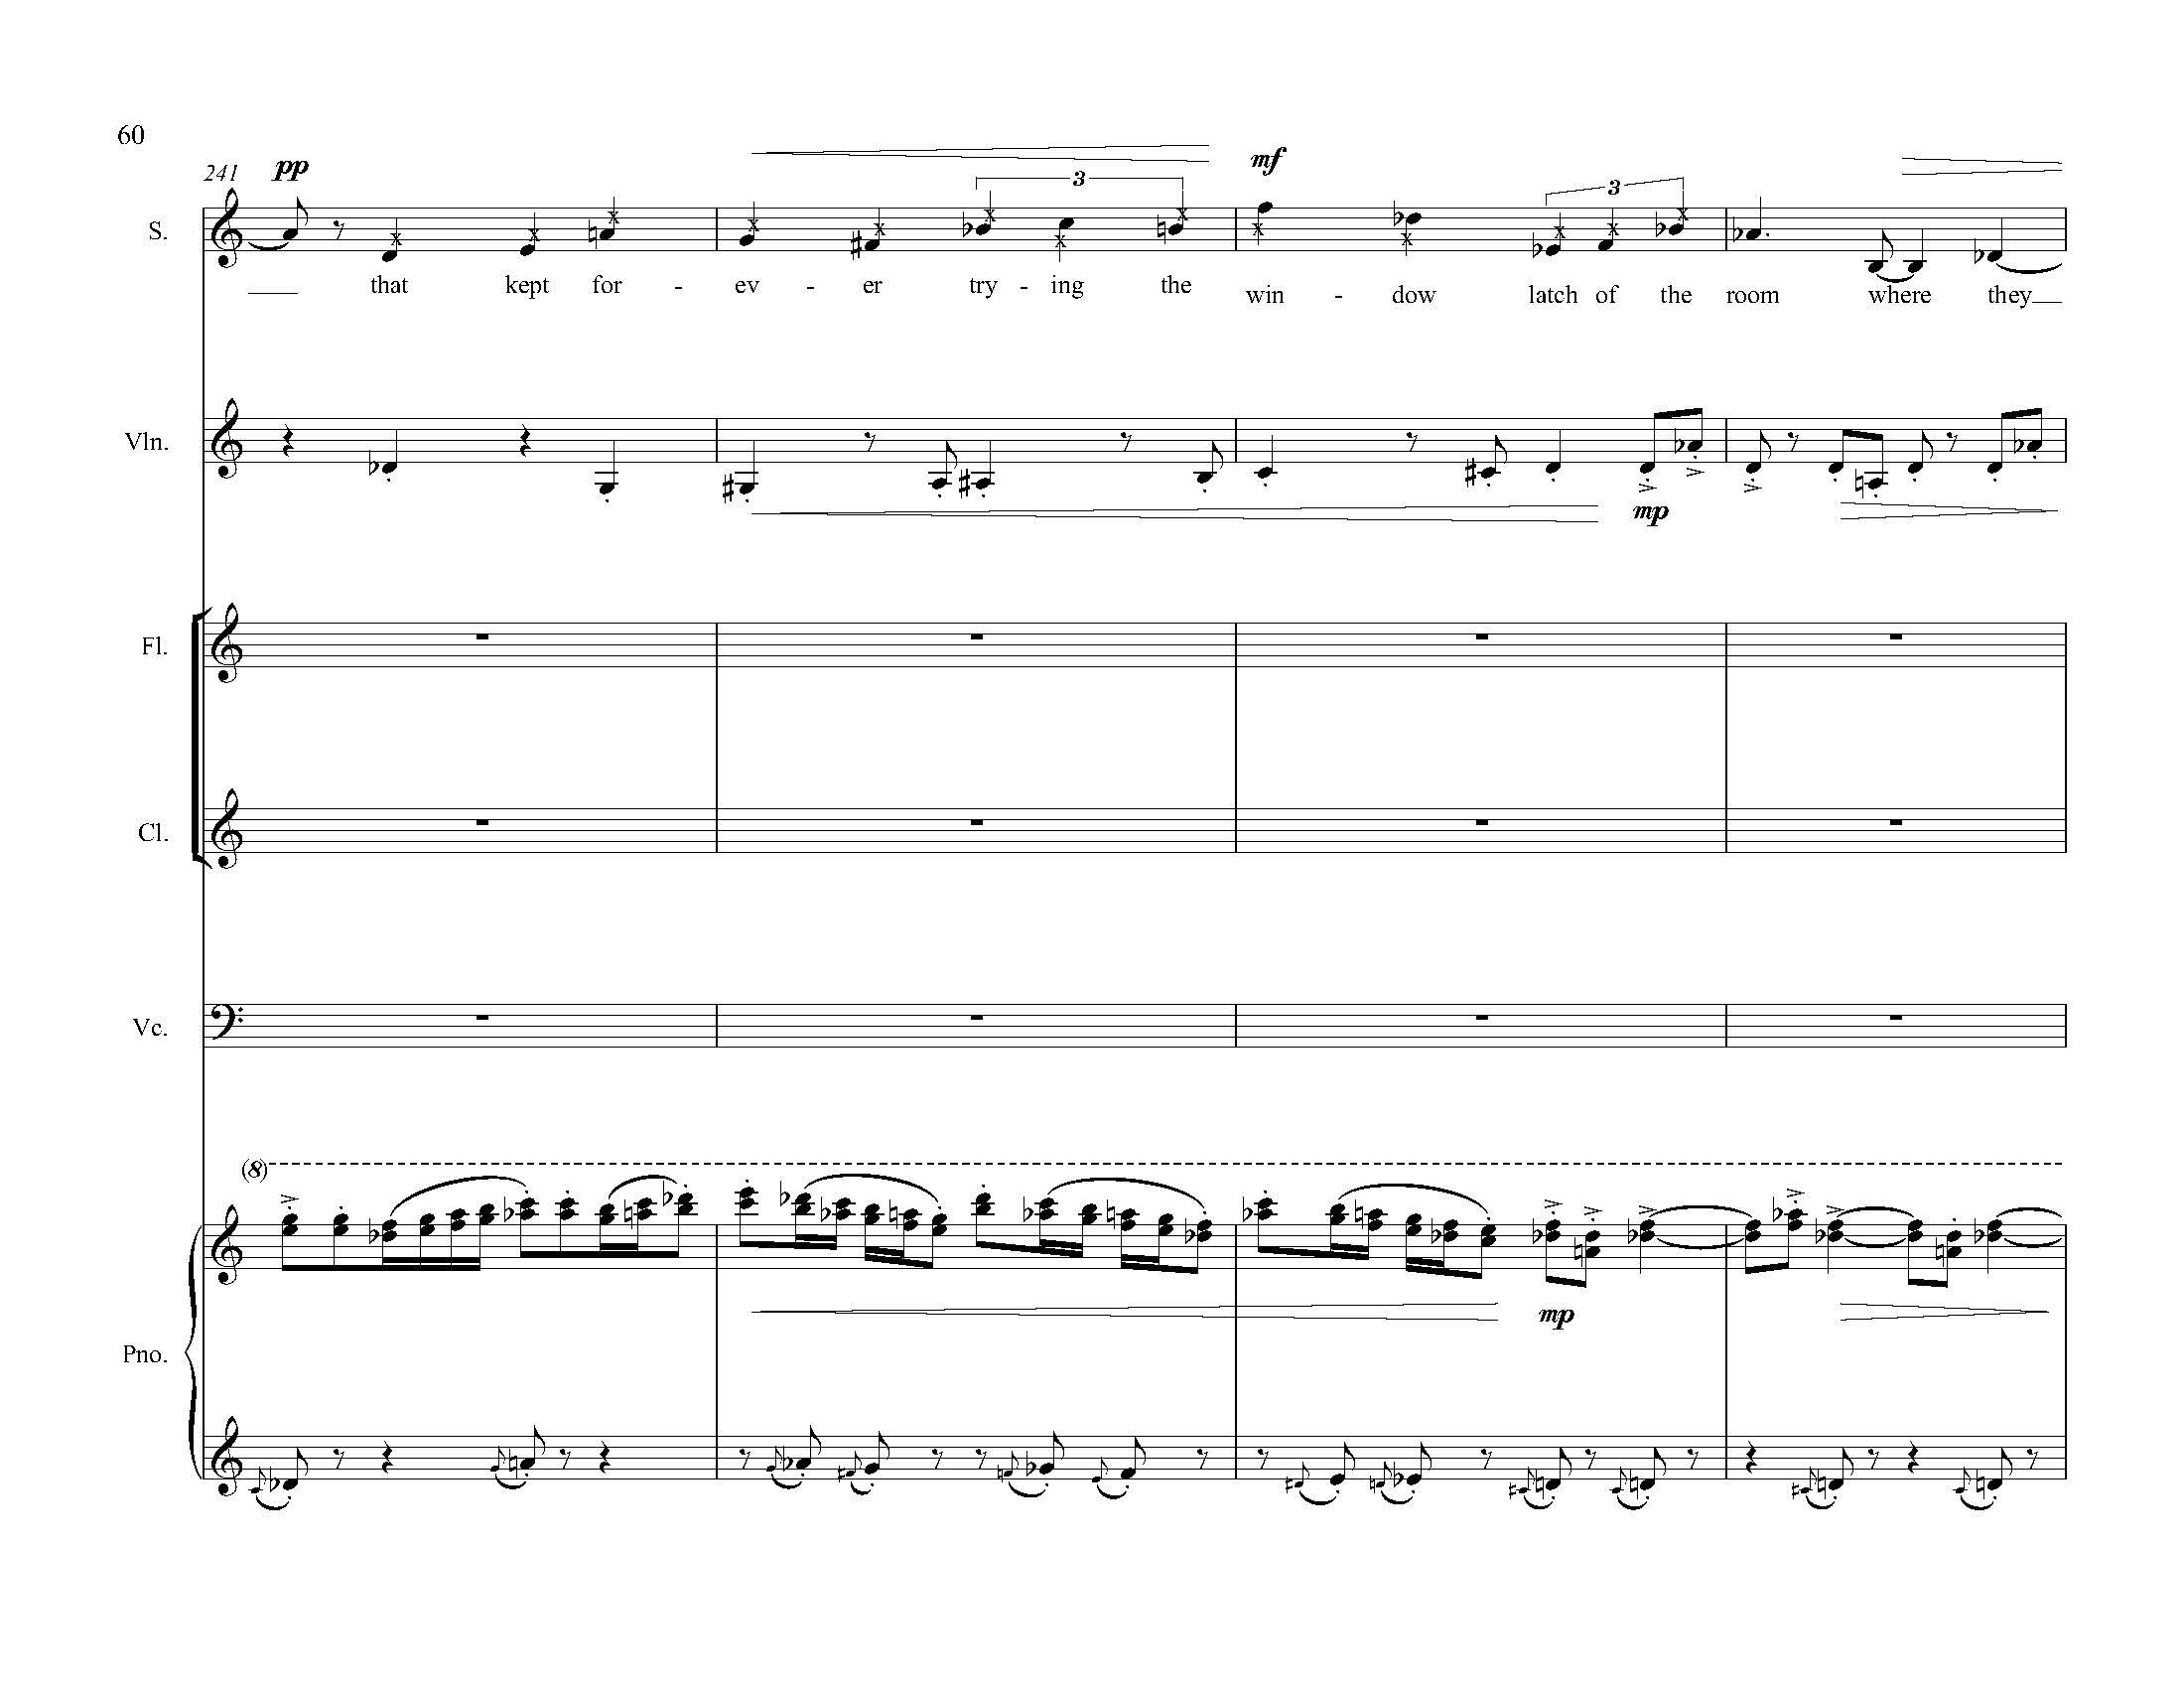 The Hill Wife - Complete Score_Page_068.jpg